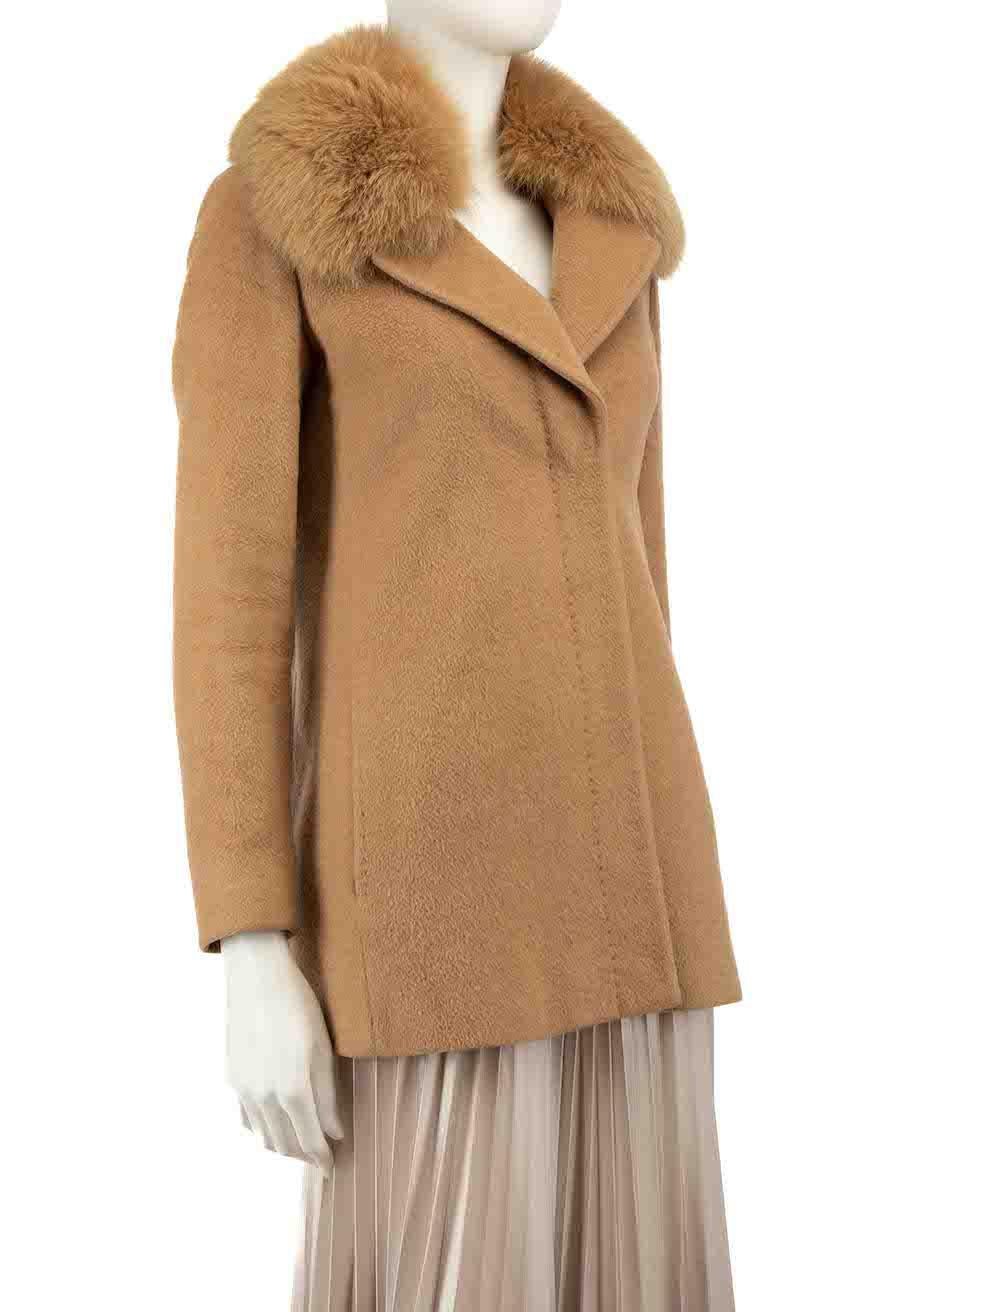 CONDITION is Very good. Minimal wear to coat is evident. Minimal wear to the lining with a very small split found at the centre back and noticeable discolouration of the brand logo at the back of the neck on this used Max Mara designer resale item.